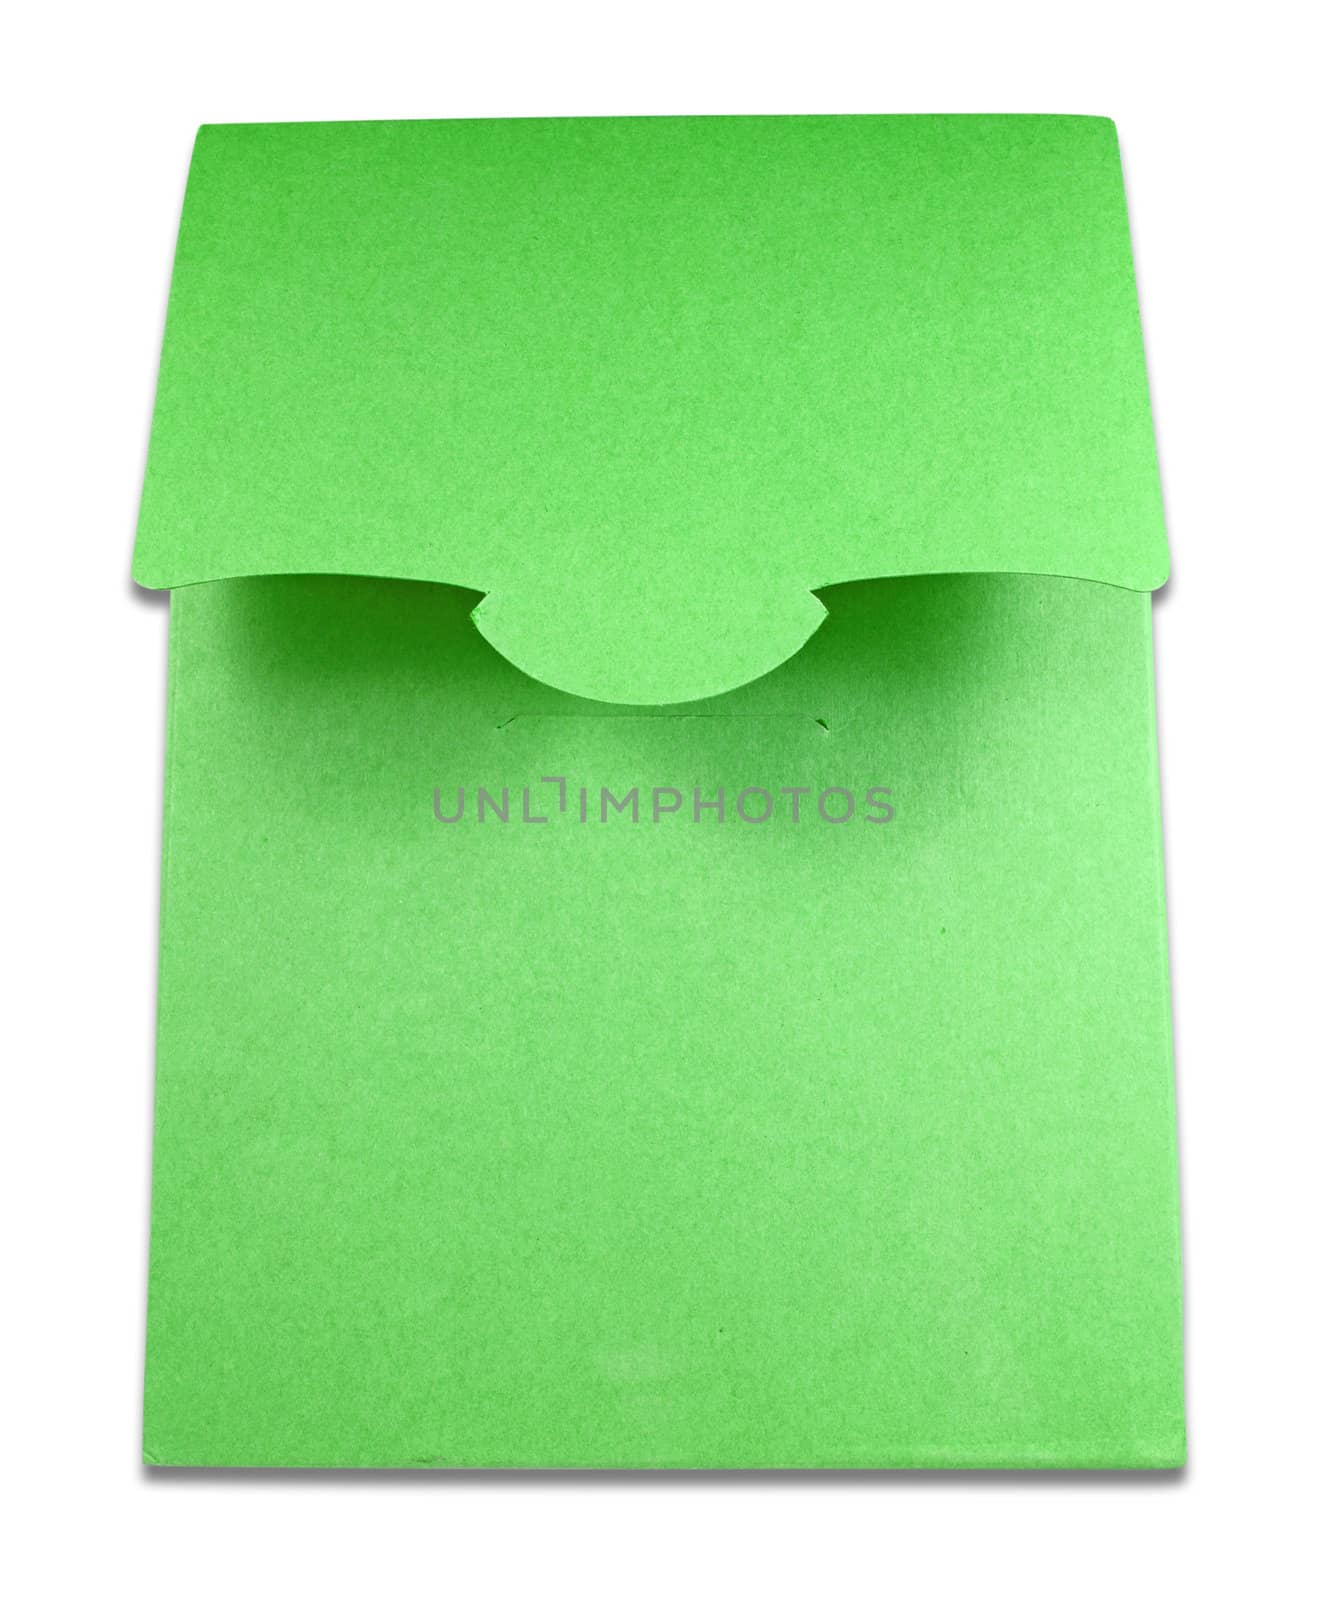 Blank package of green box isolated on white background by nuchylee